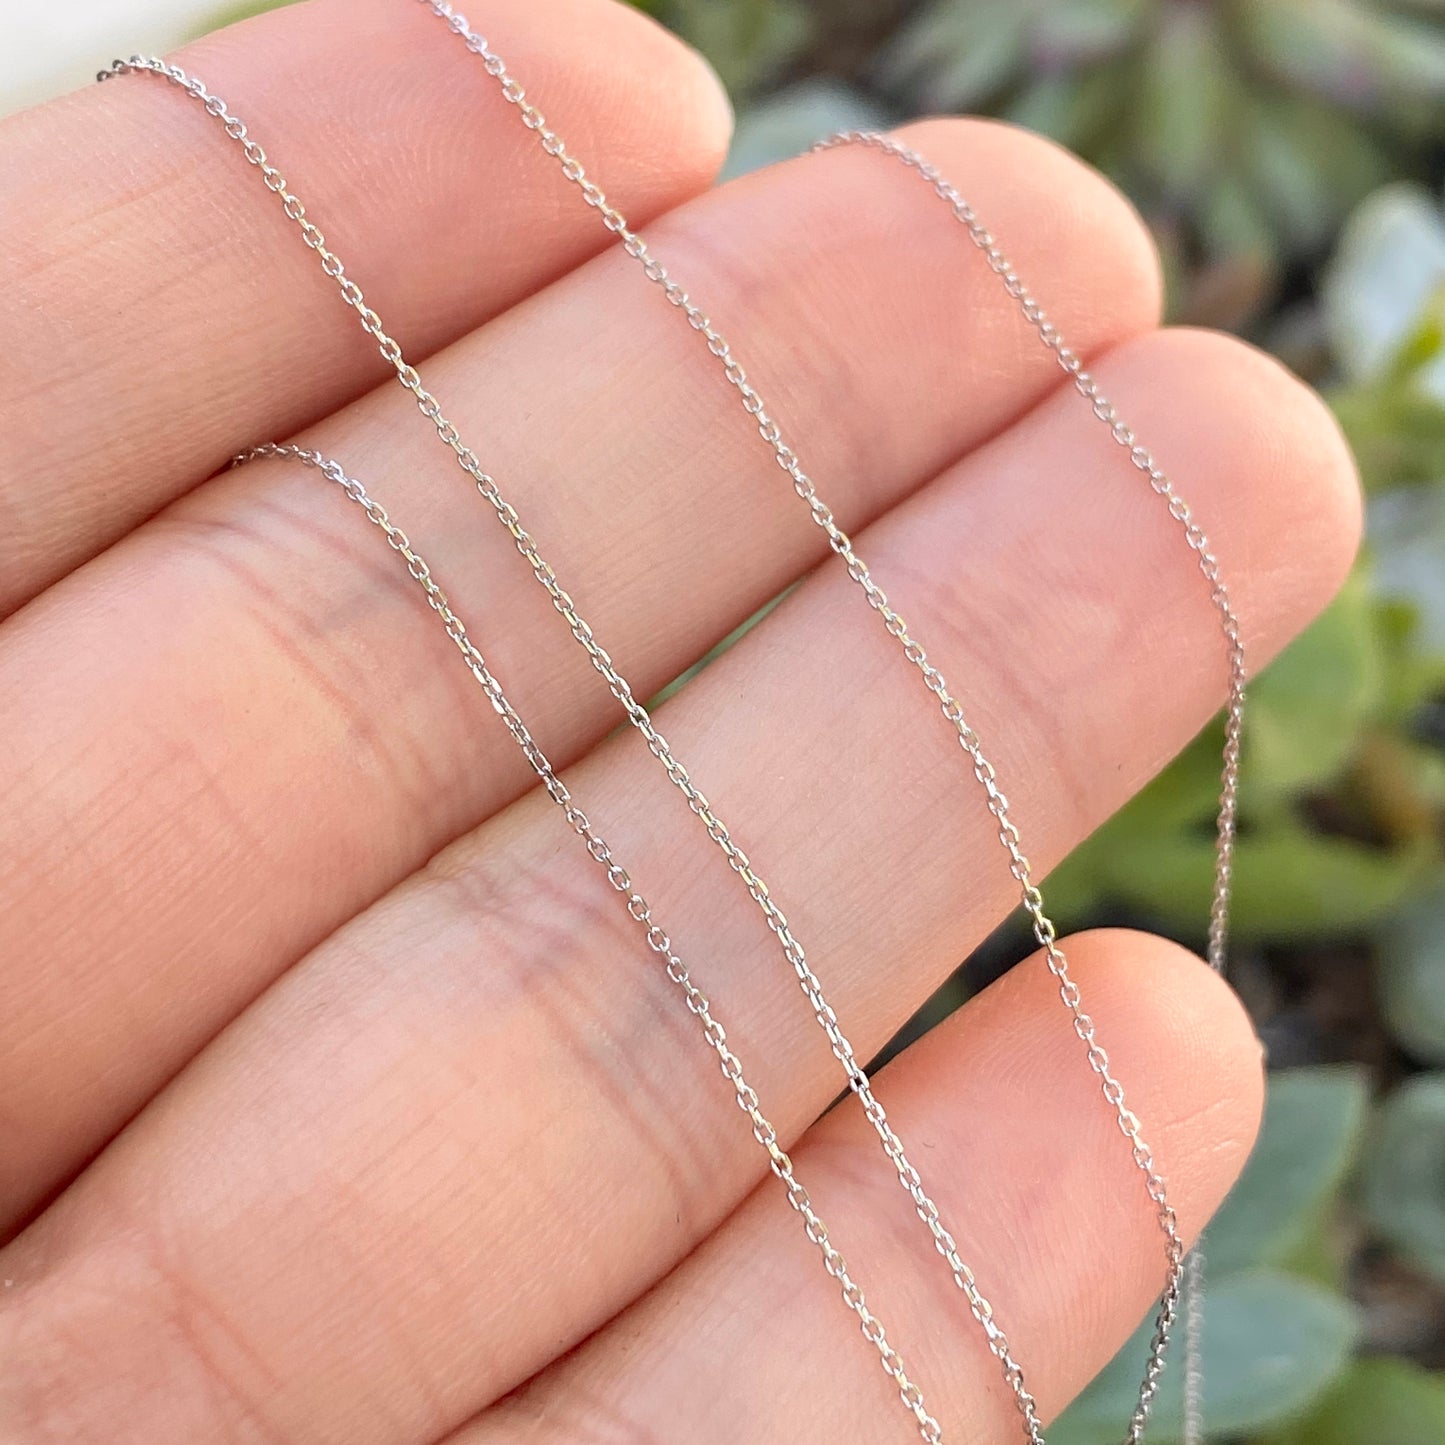 10KT White Gold Thin Diamond-Cut Cable Link Chain Necklace .60mm, 10KT White Gold Thin Diamond-Cut Cable Link Chain Necklace .60mm - Legacy Saint Jewelry